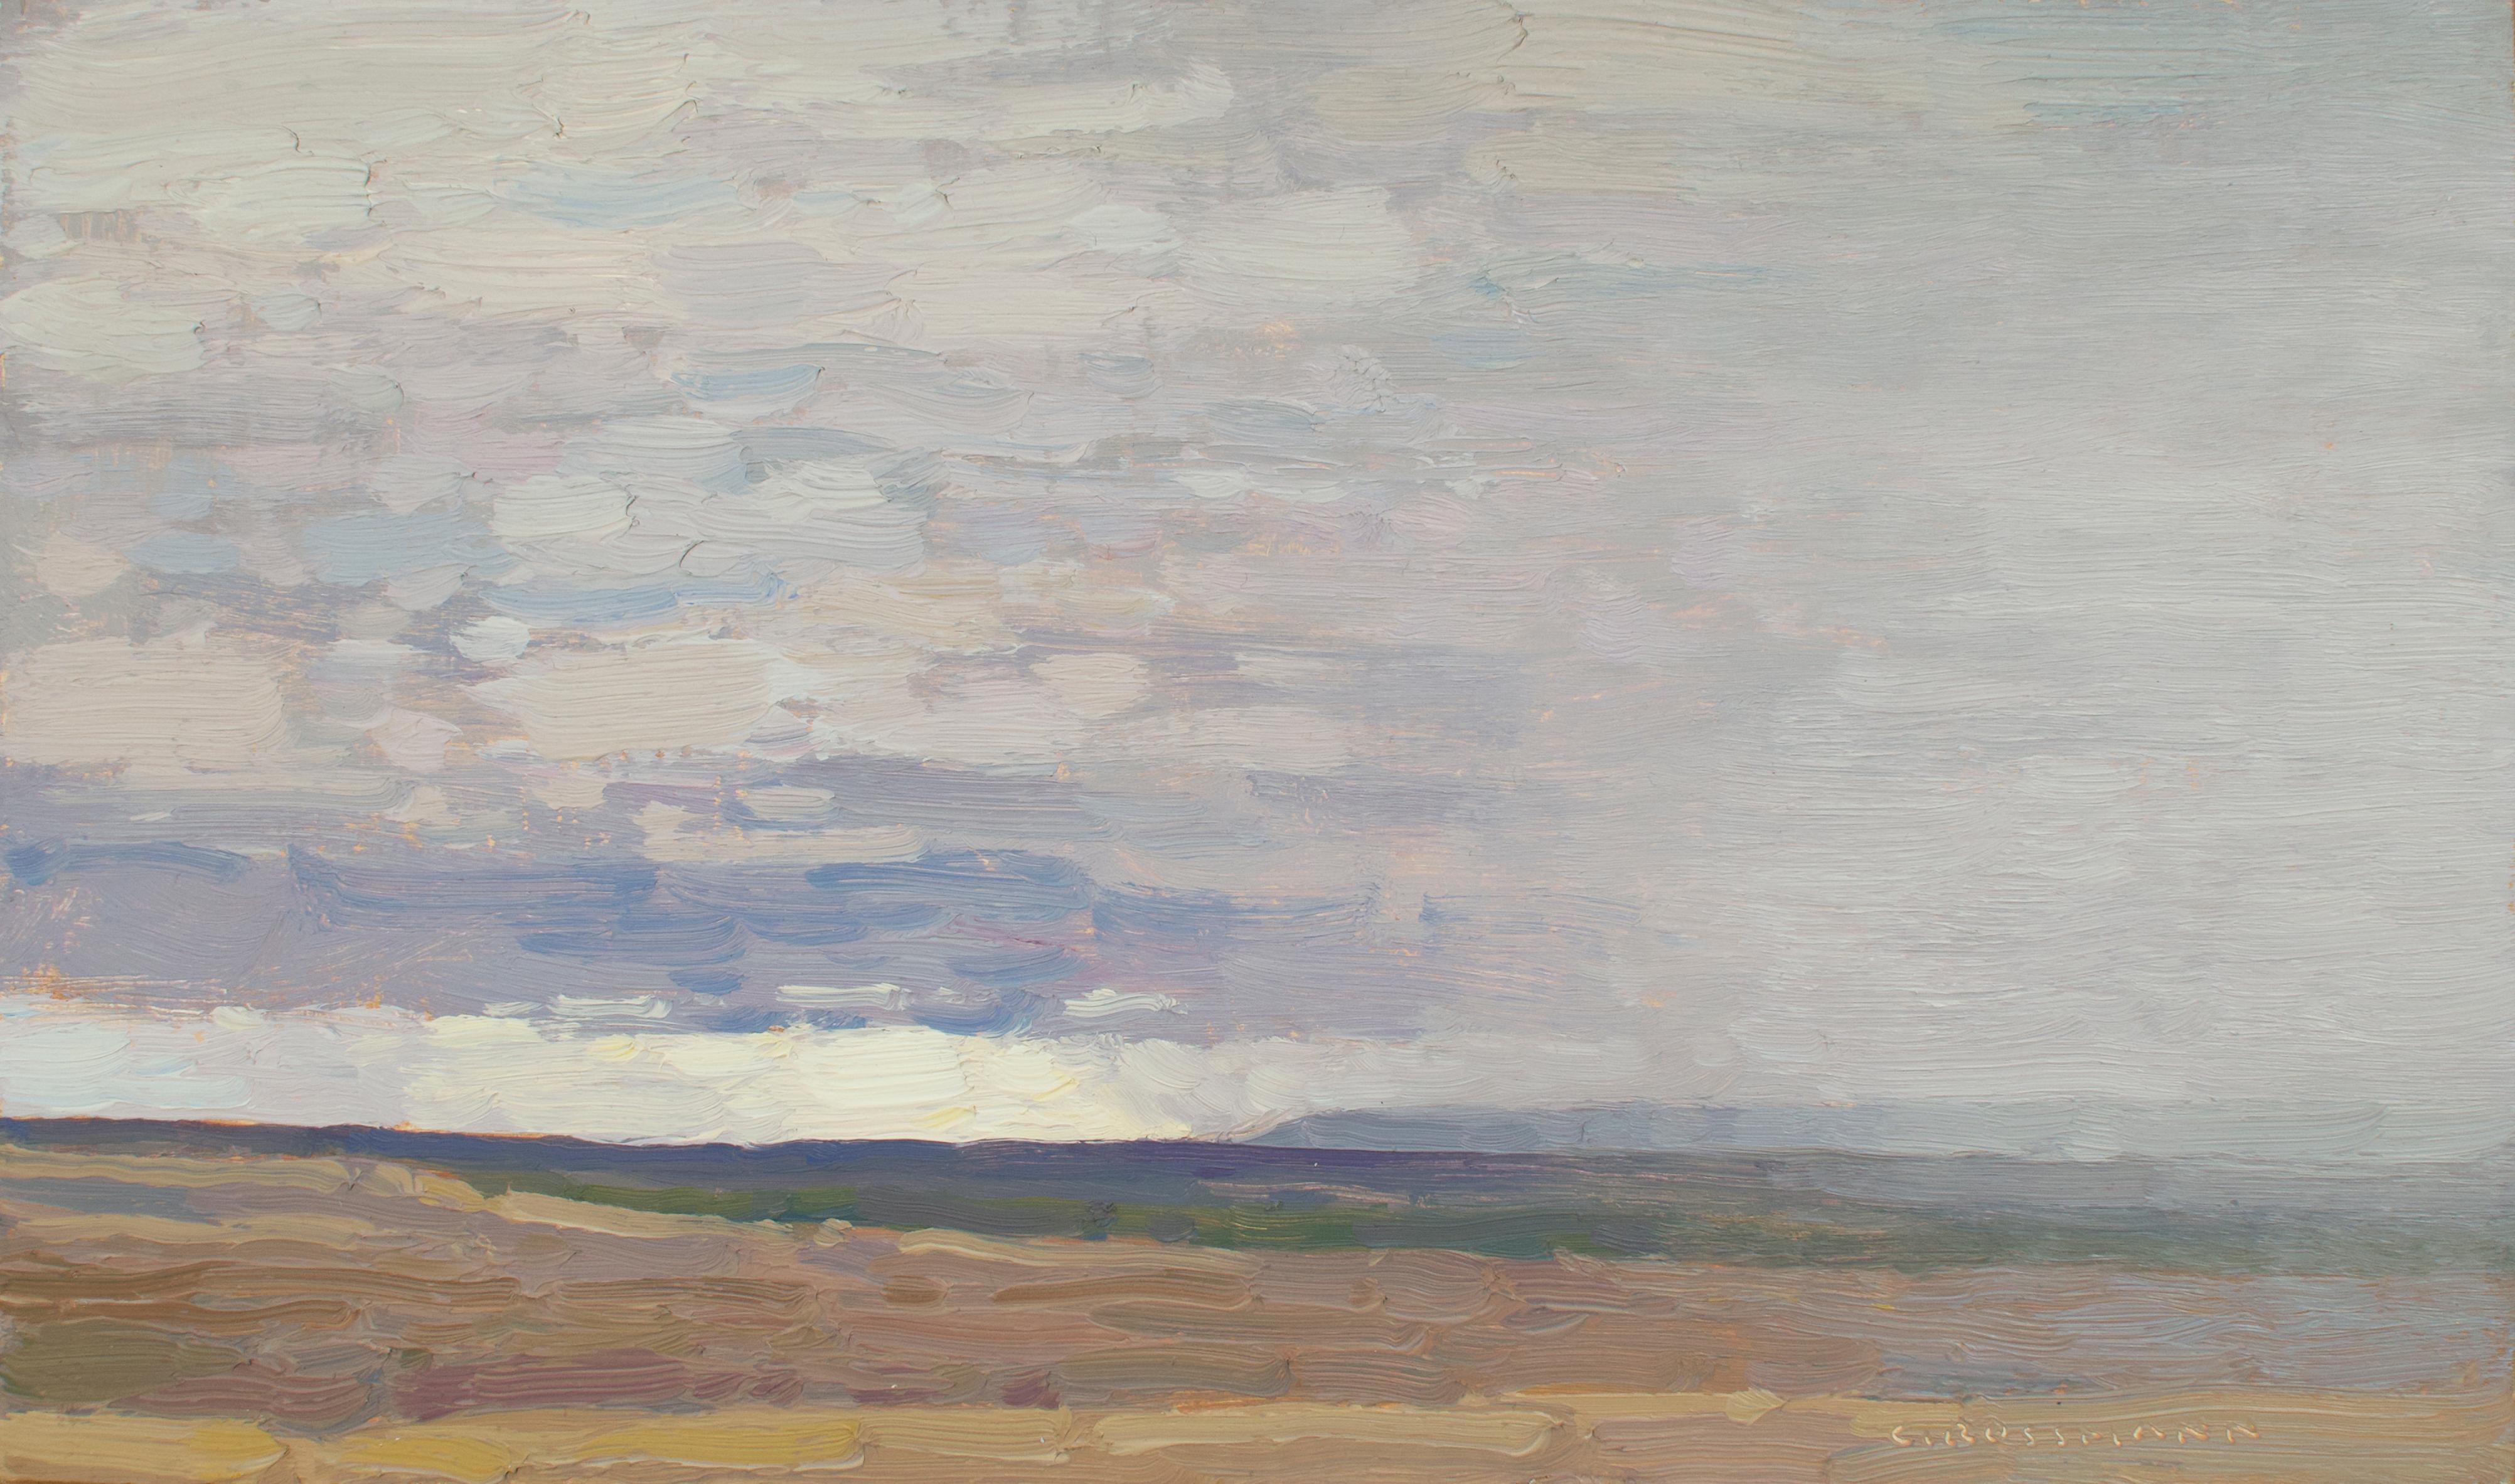 David Grossmann Landscape Painting - "View to the South with Coming Rain" , Oil Painting